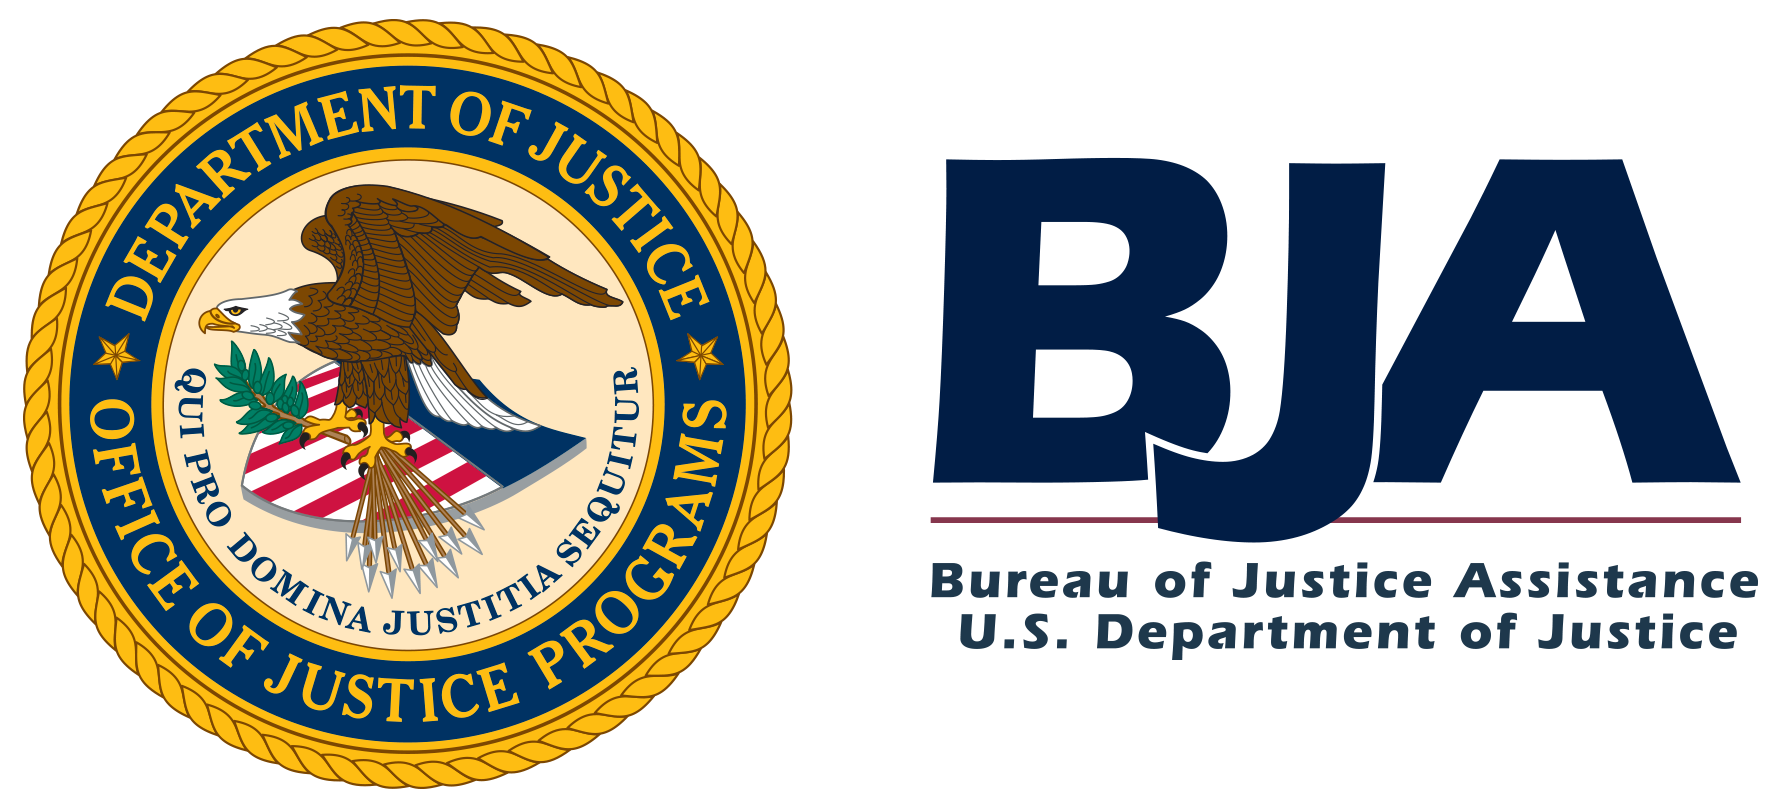 Bureau of Justice Assistance logo next to Office of Justice Programs seal